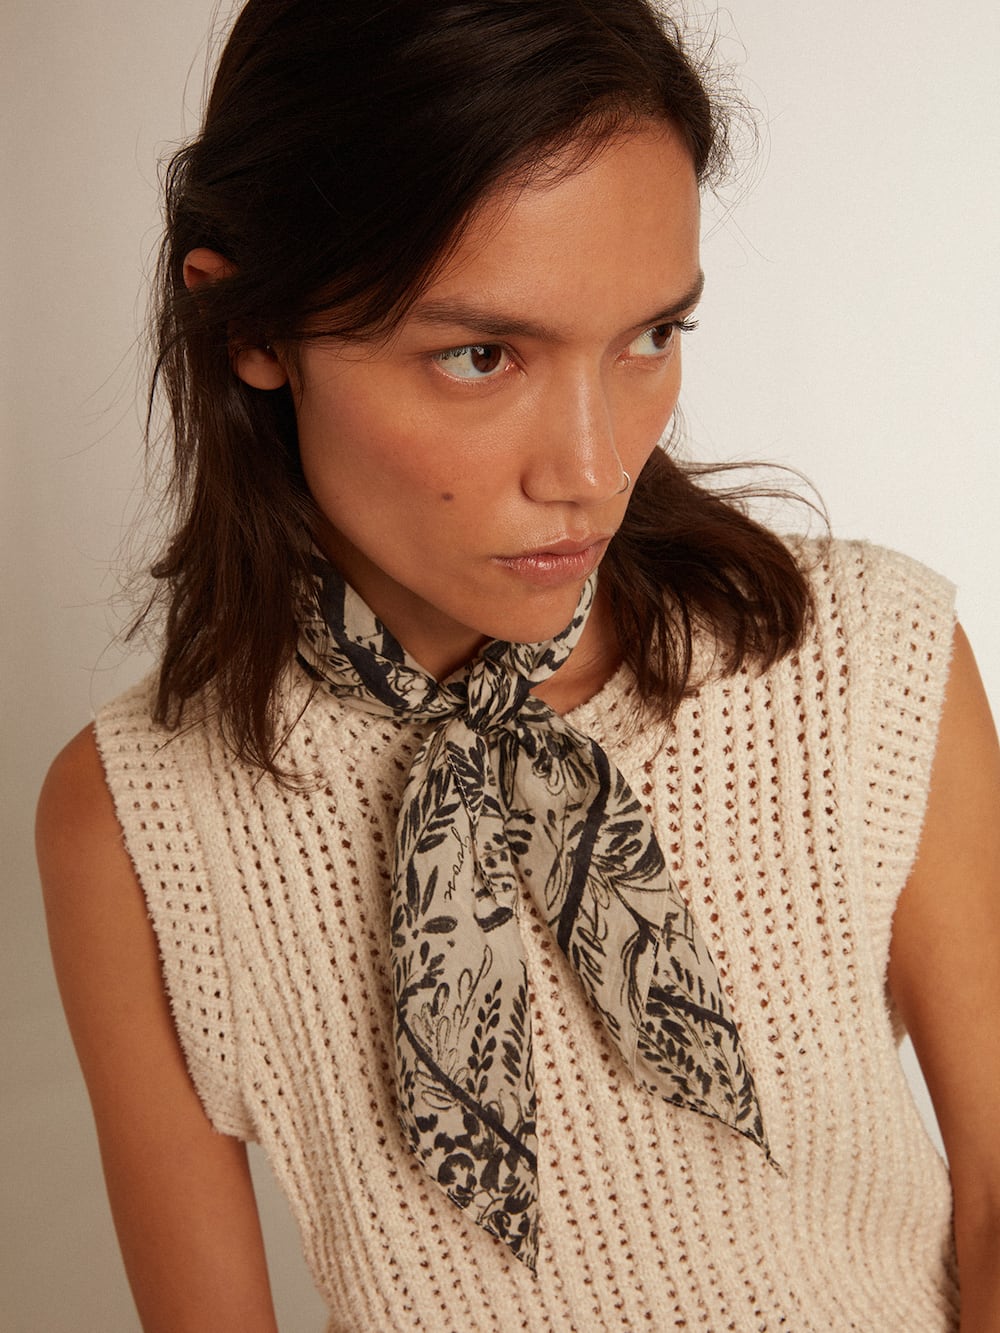 Golden Goose - Bone-white scarf with contrasting toile de jouy pattern in 